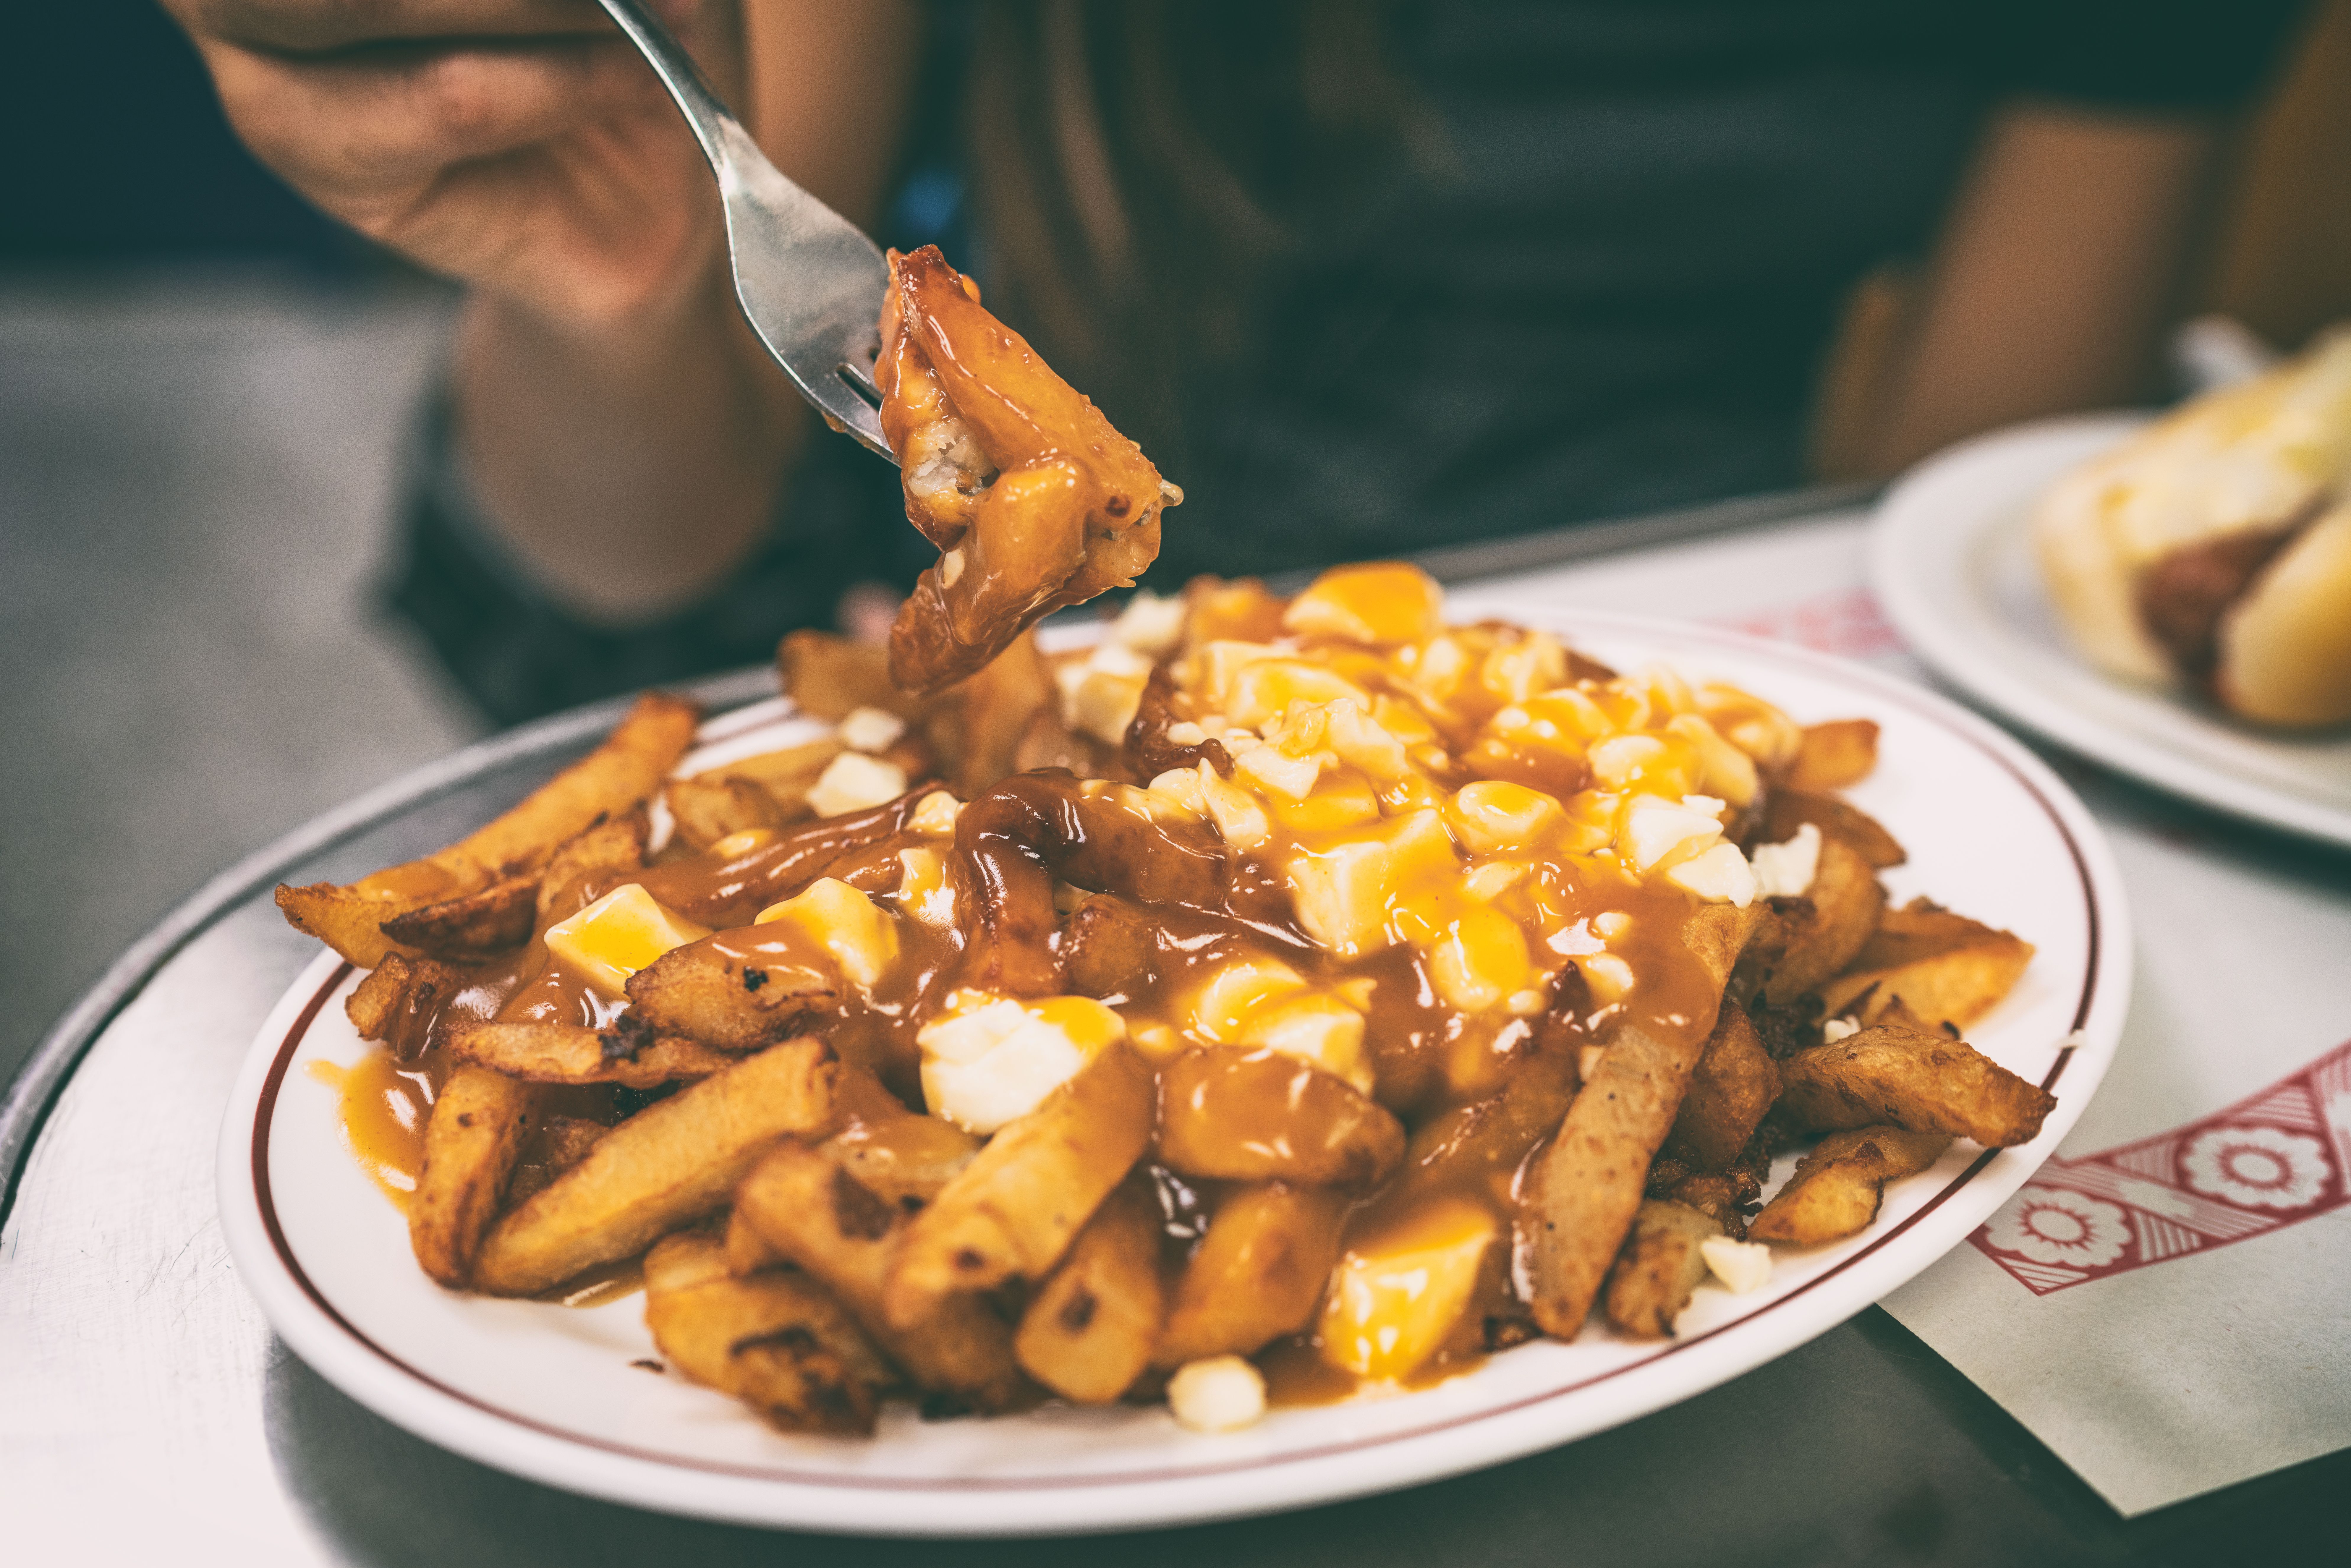 a plate of poutine in montreal